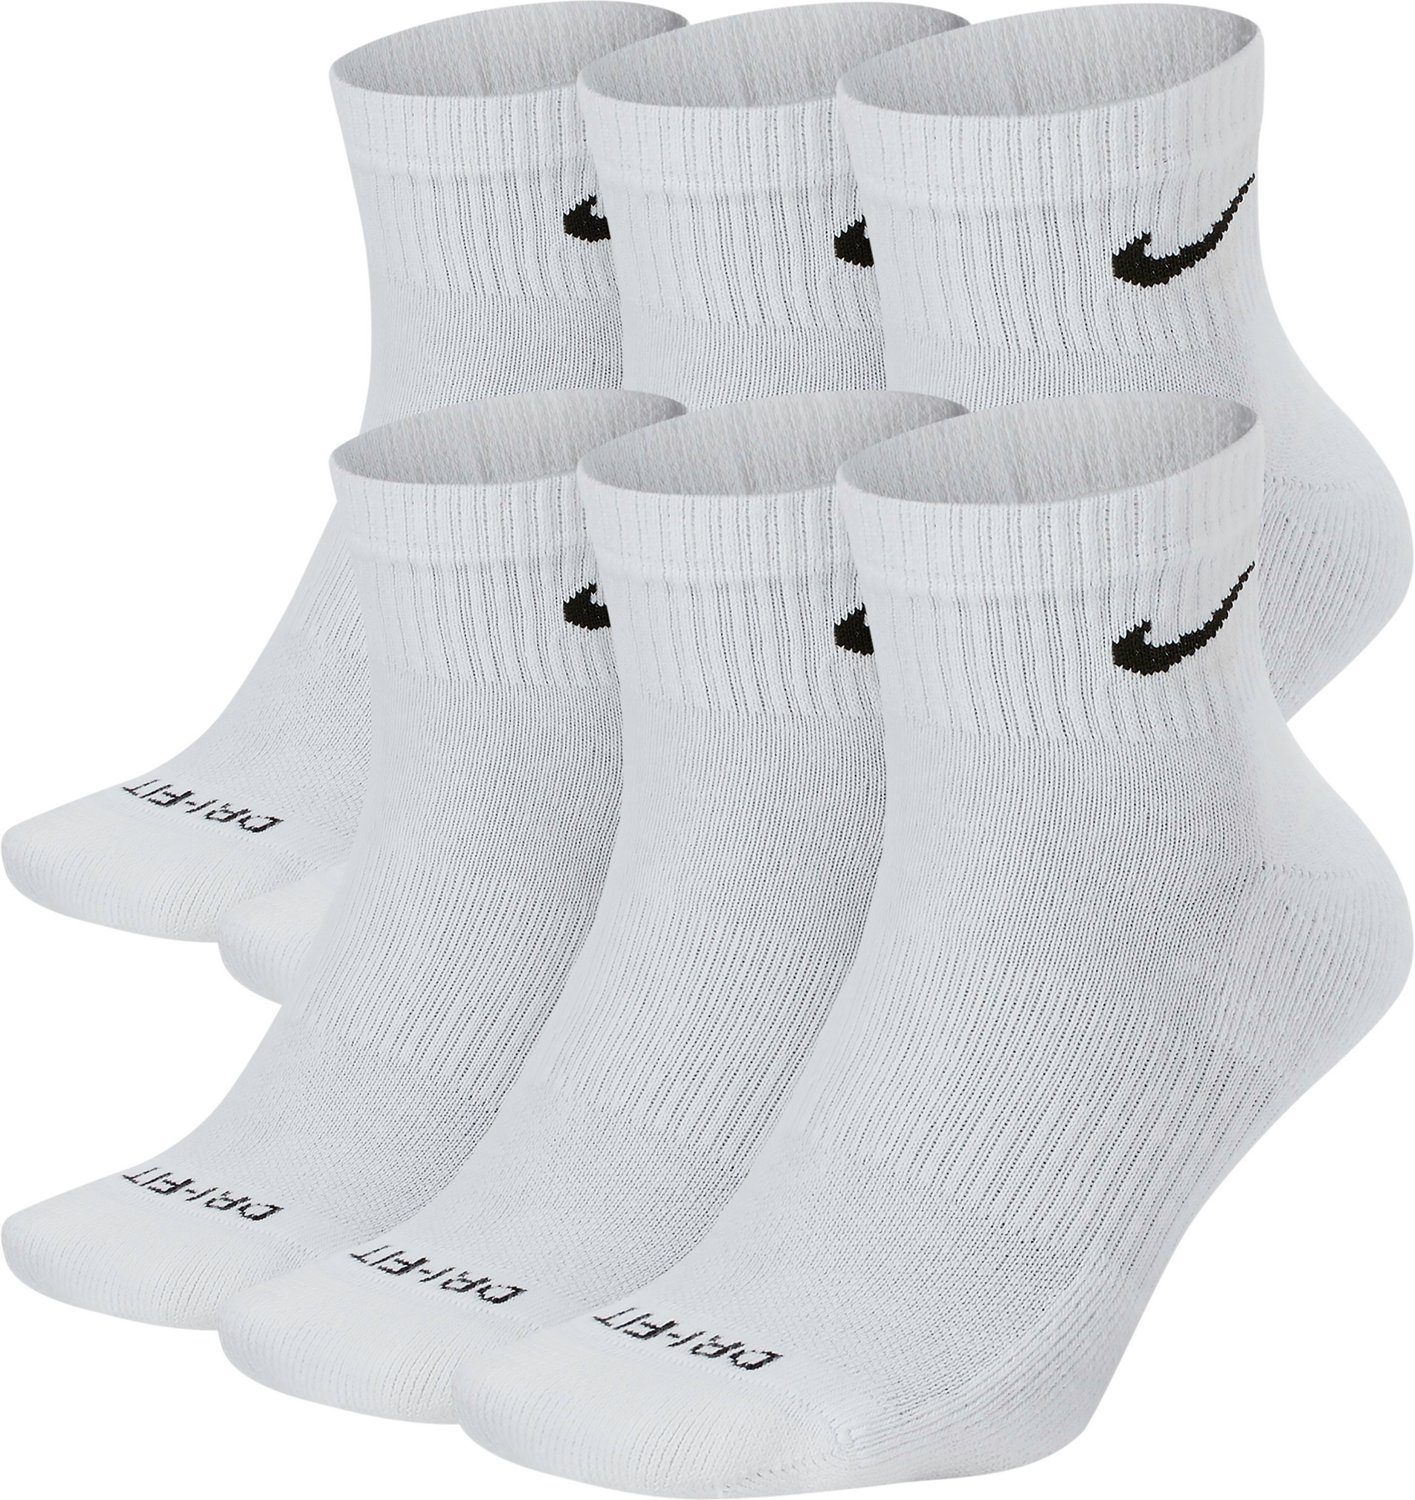 Nike Men's Everyday Plus Cushion Dri-FIT Training Ankle Socks 6 Pack                                                             - view number 1 selected